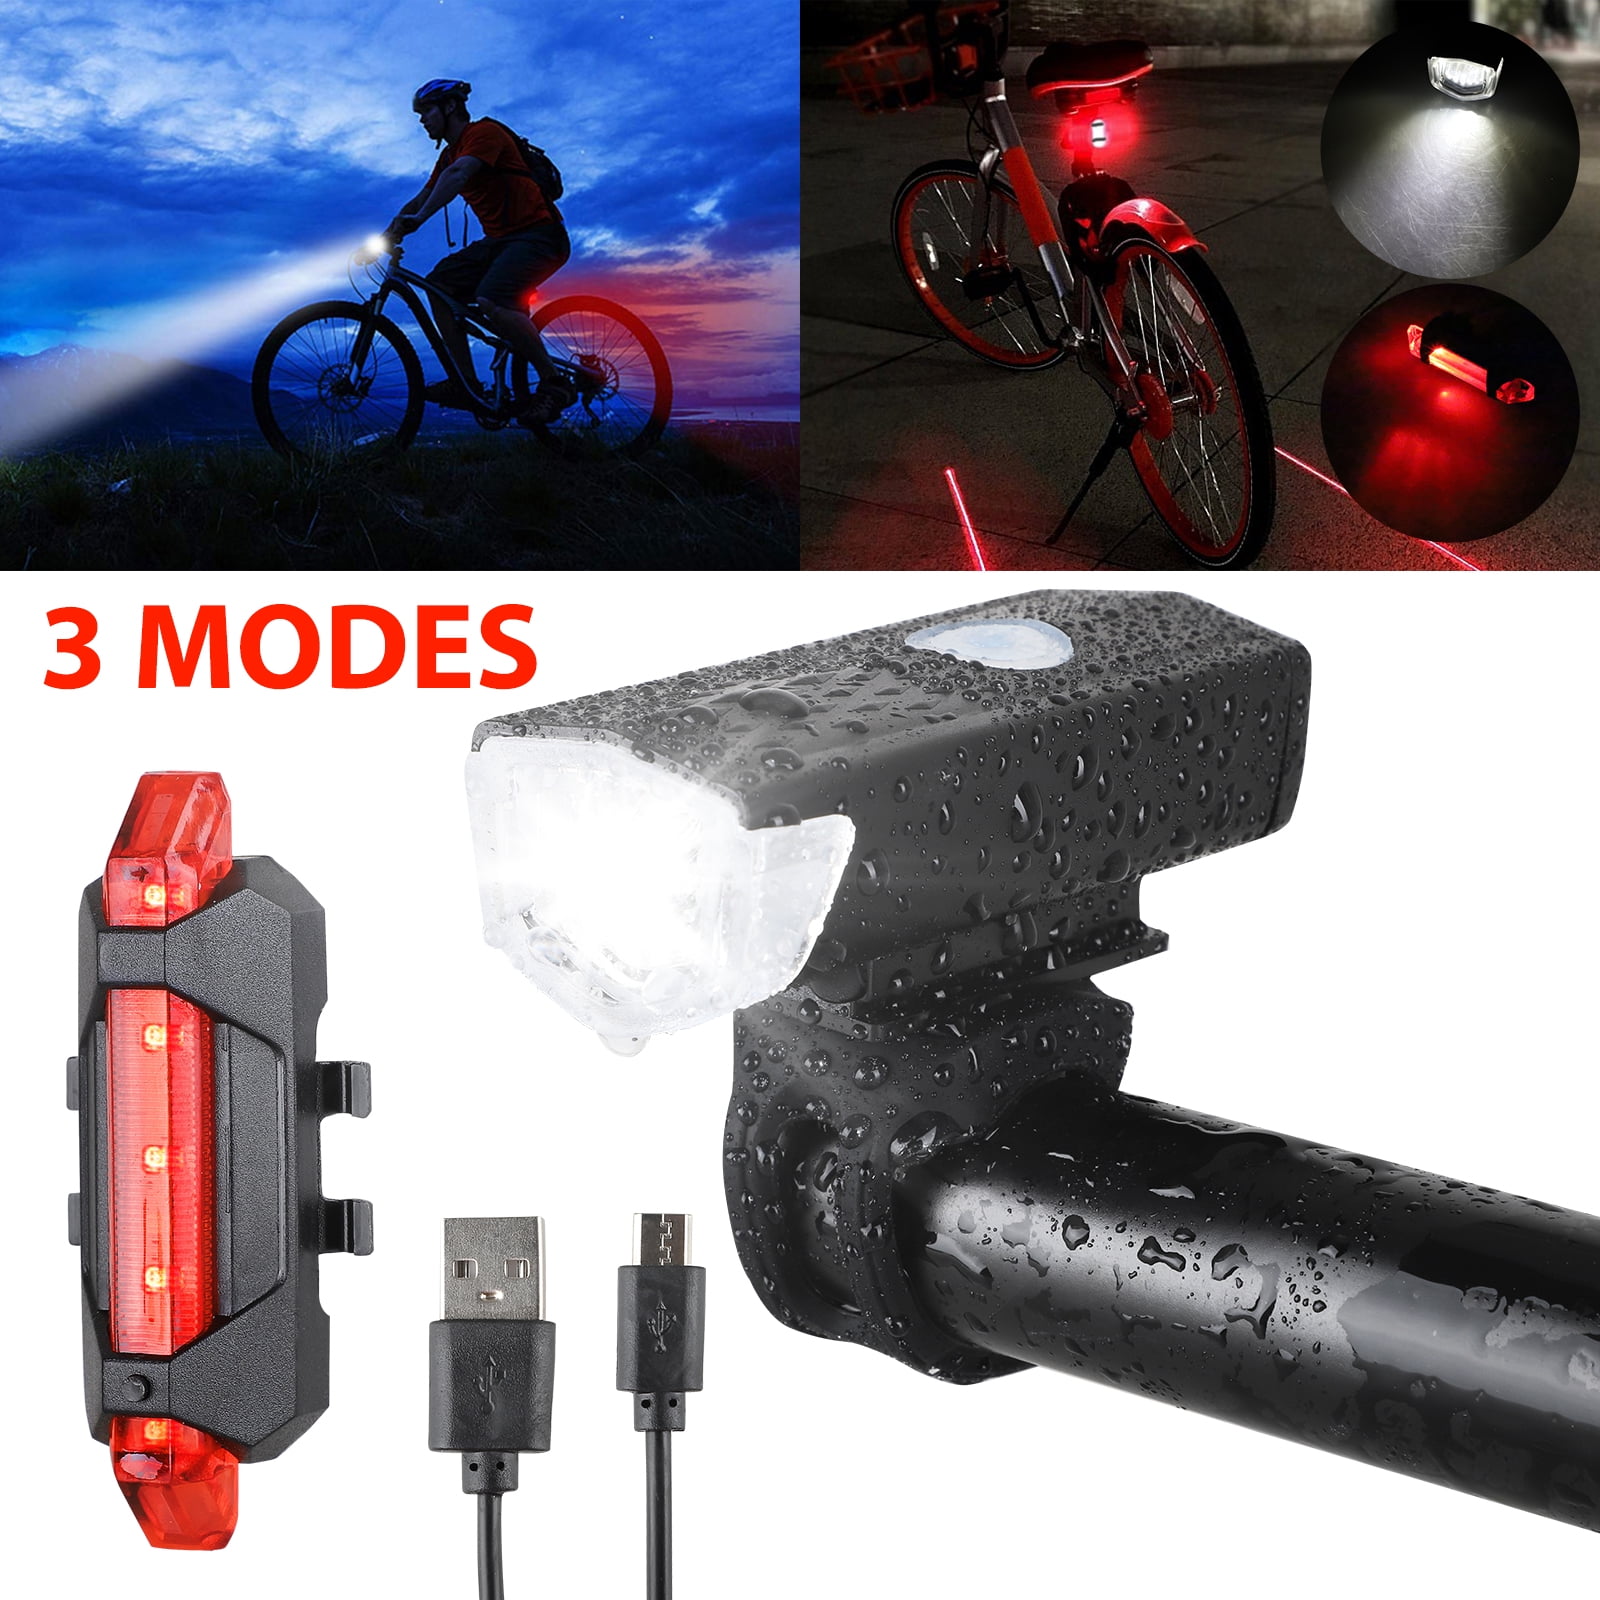 LED Bike Tail Light BrightRoad Bike Lights Front and Back Set Rechargeable 800 Lumens Bike Headlight with Wide 85° & 650ft Distance IPX6 Waterproof Bicycle Lights Front and Rear for Night Riding